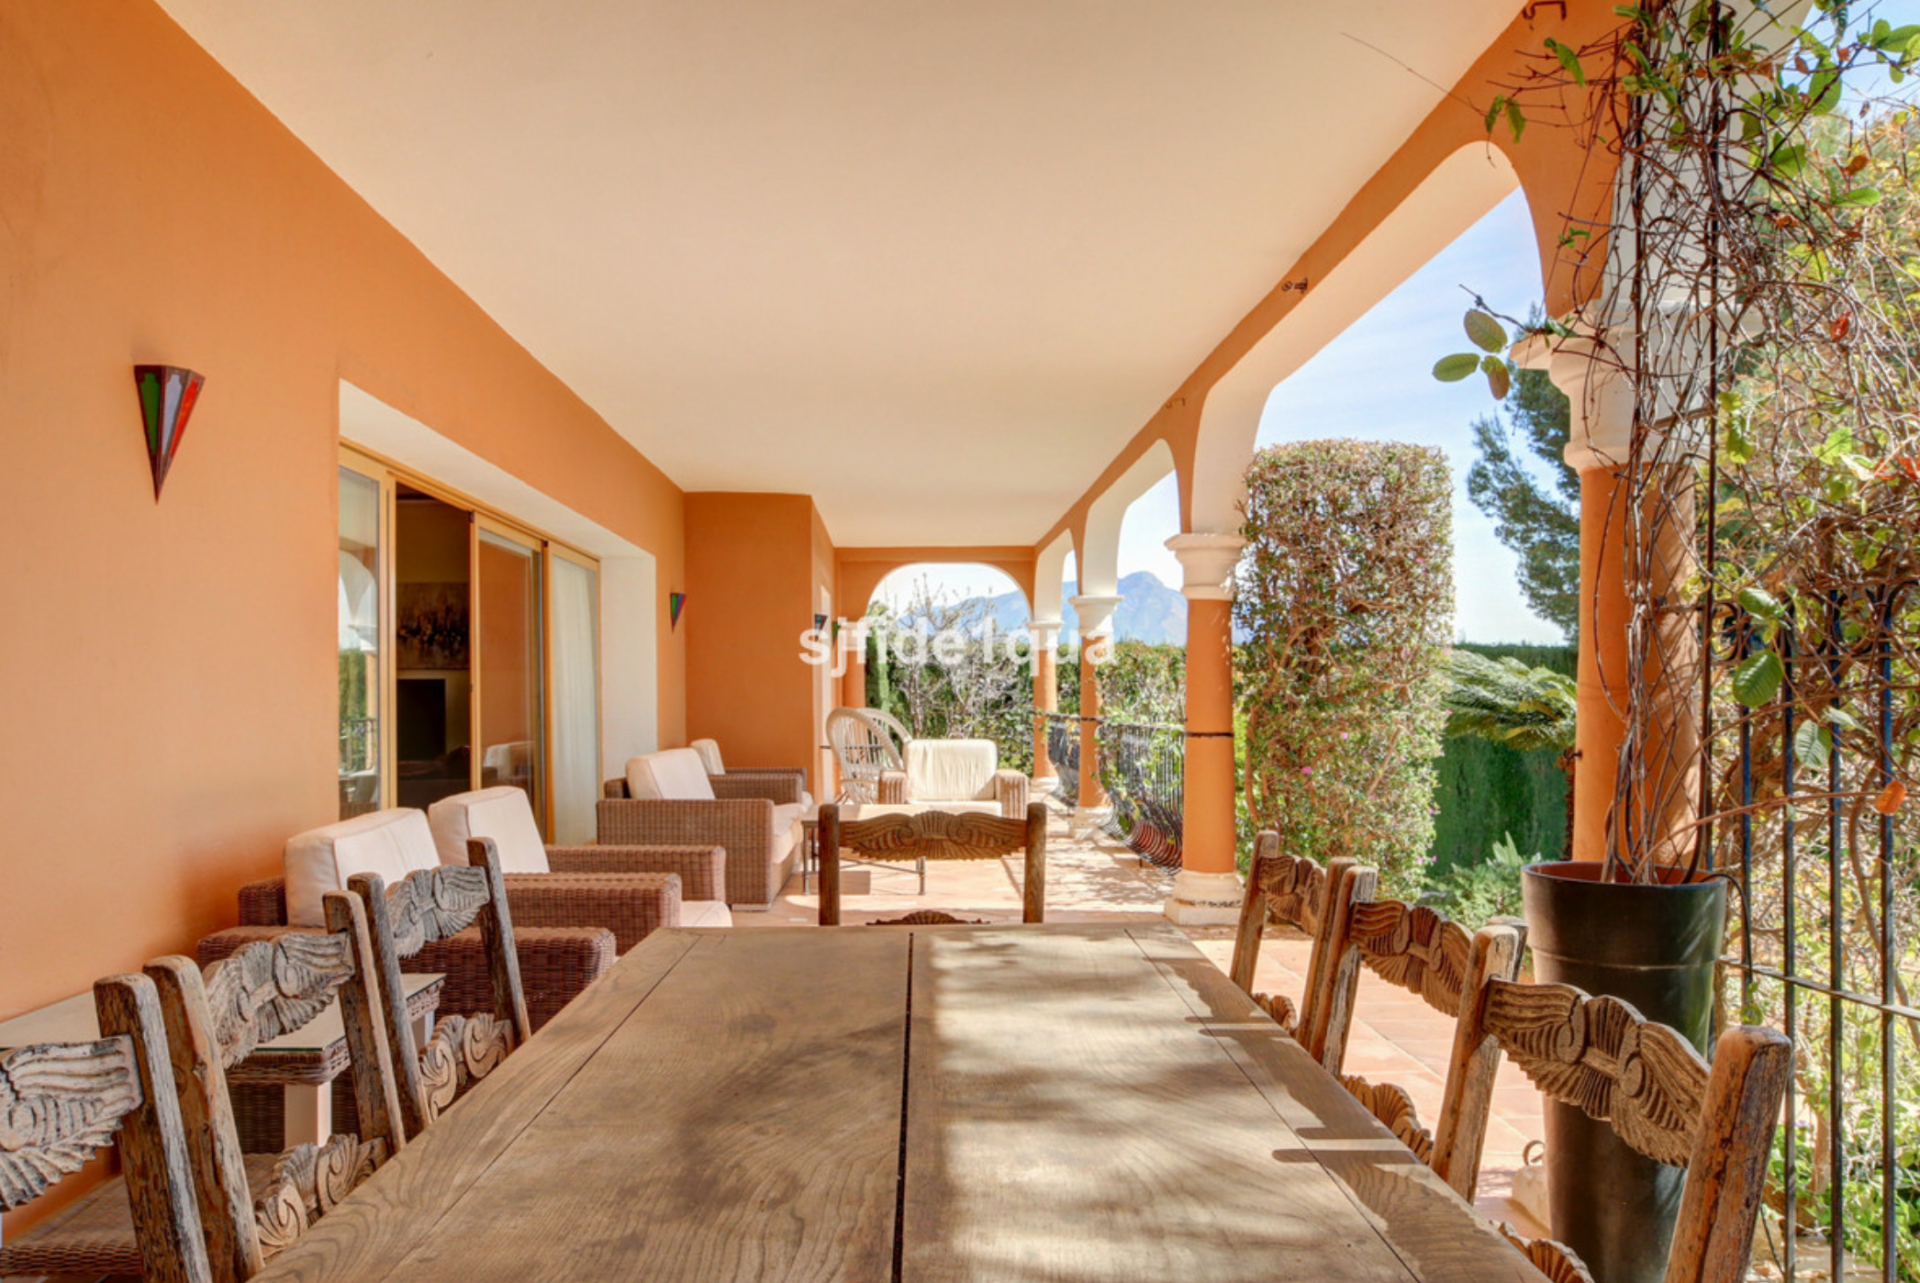 Well located villa with magnificent views of the sea and mountains from an elevated position in Paraiso Alto